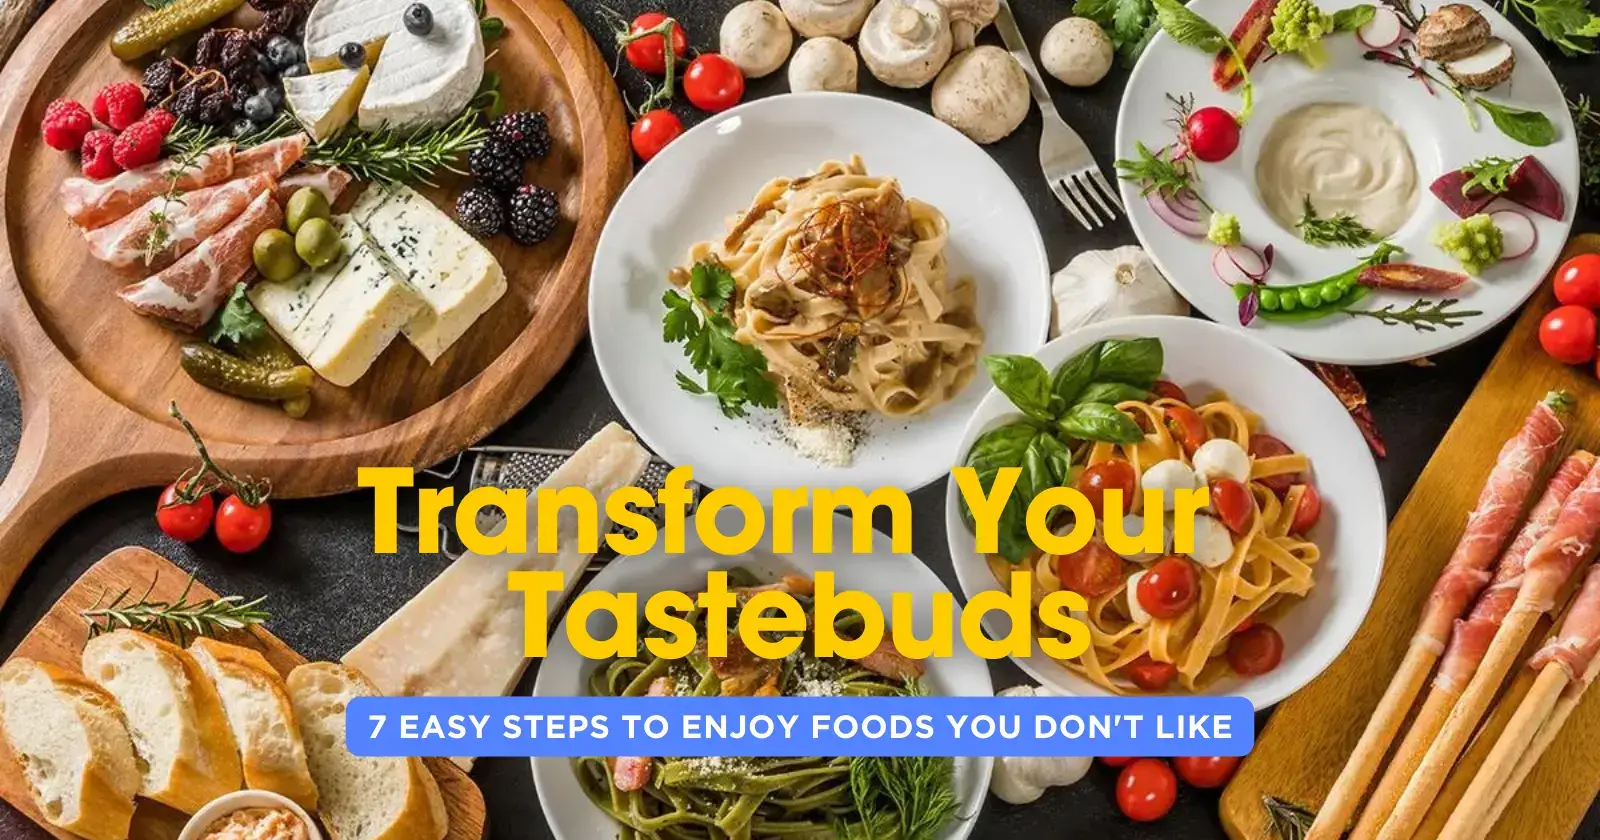 transform-your-tastebuds-with-these-7-easy-steps-to-enjoy-foods-you-dont-like